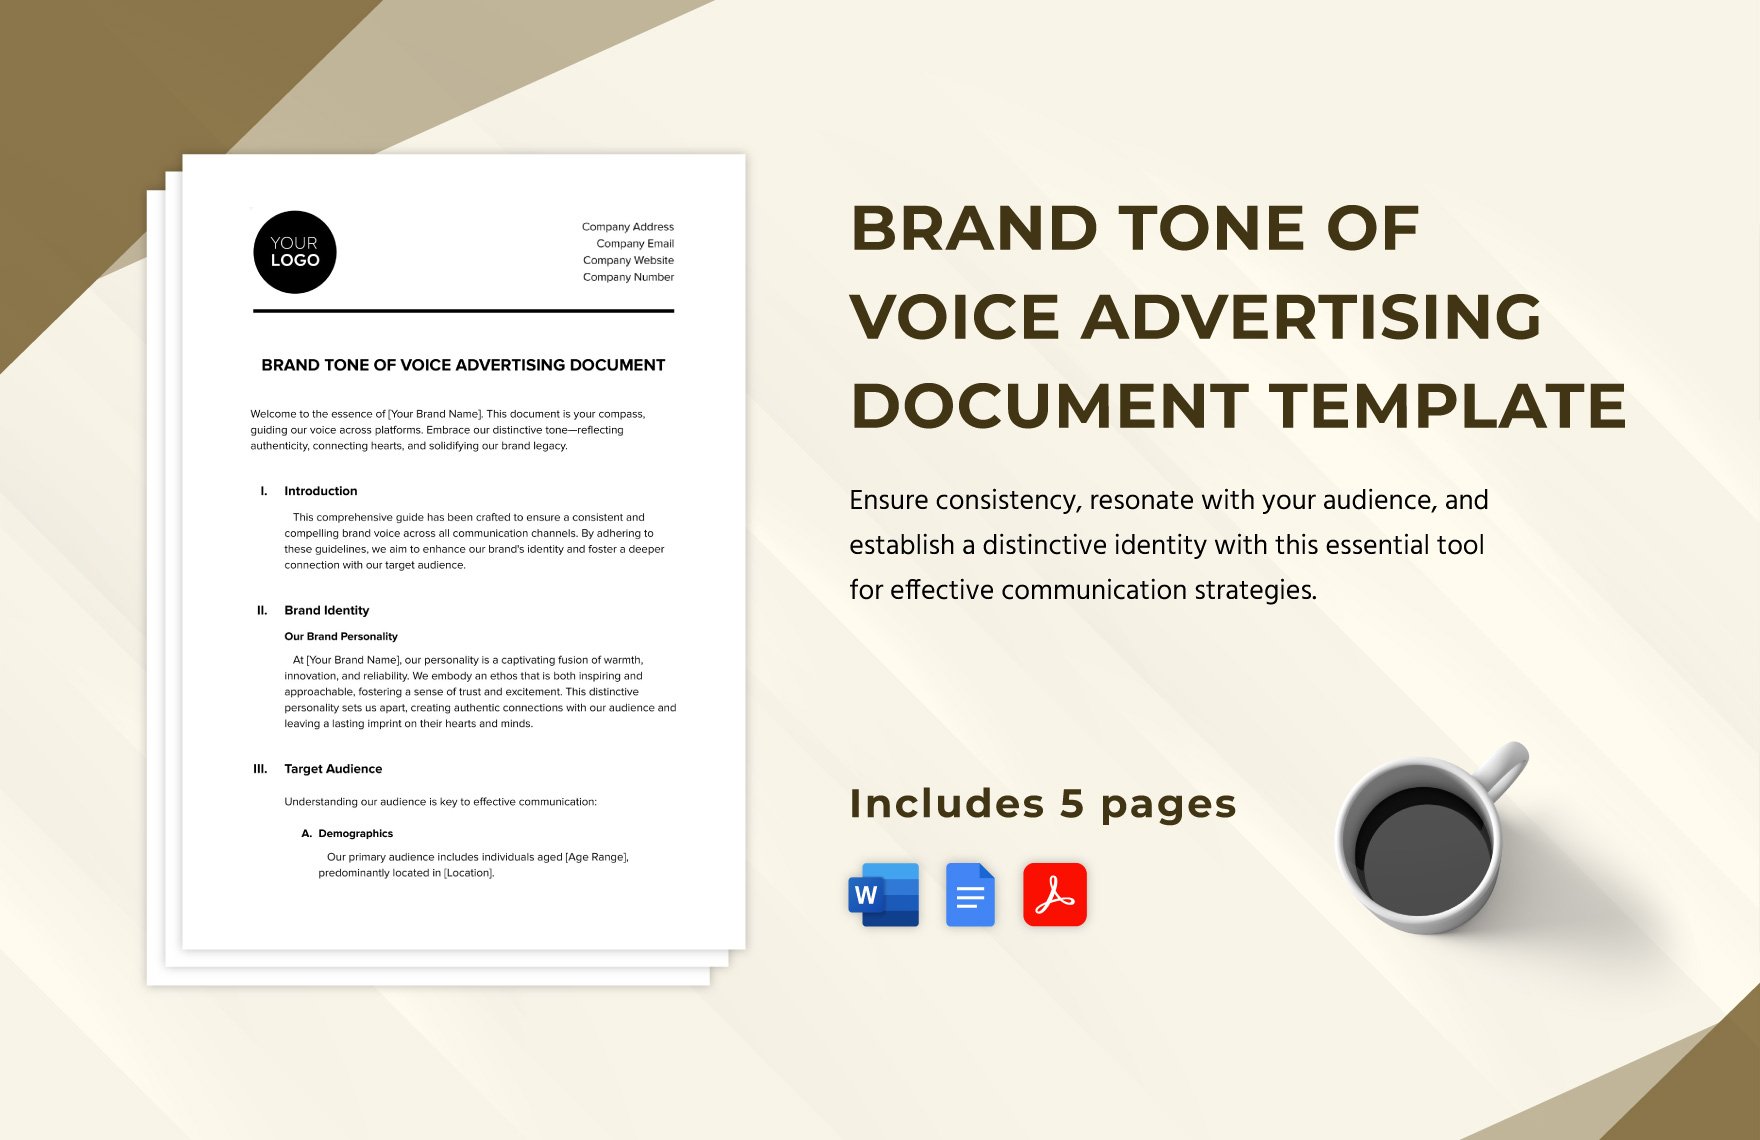 Brand Tone of Voice Advertising Document Template in Word, Google Docs, PDF